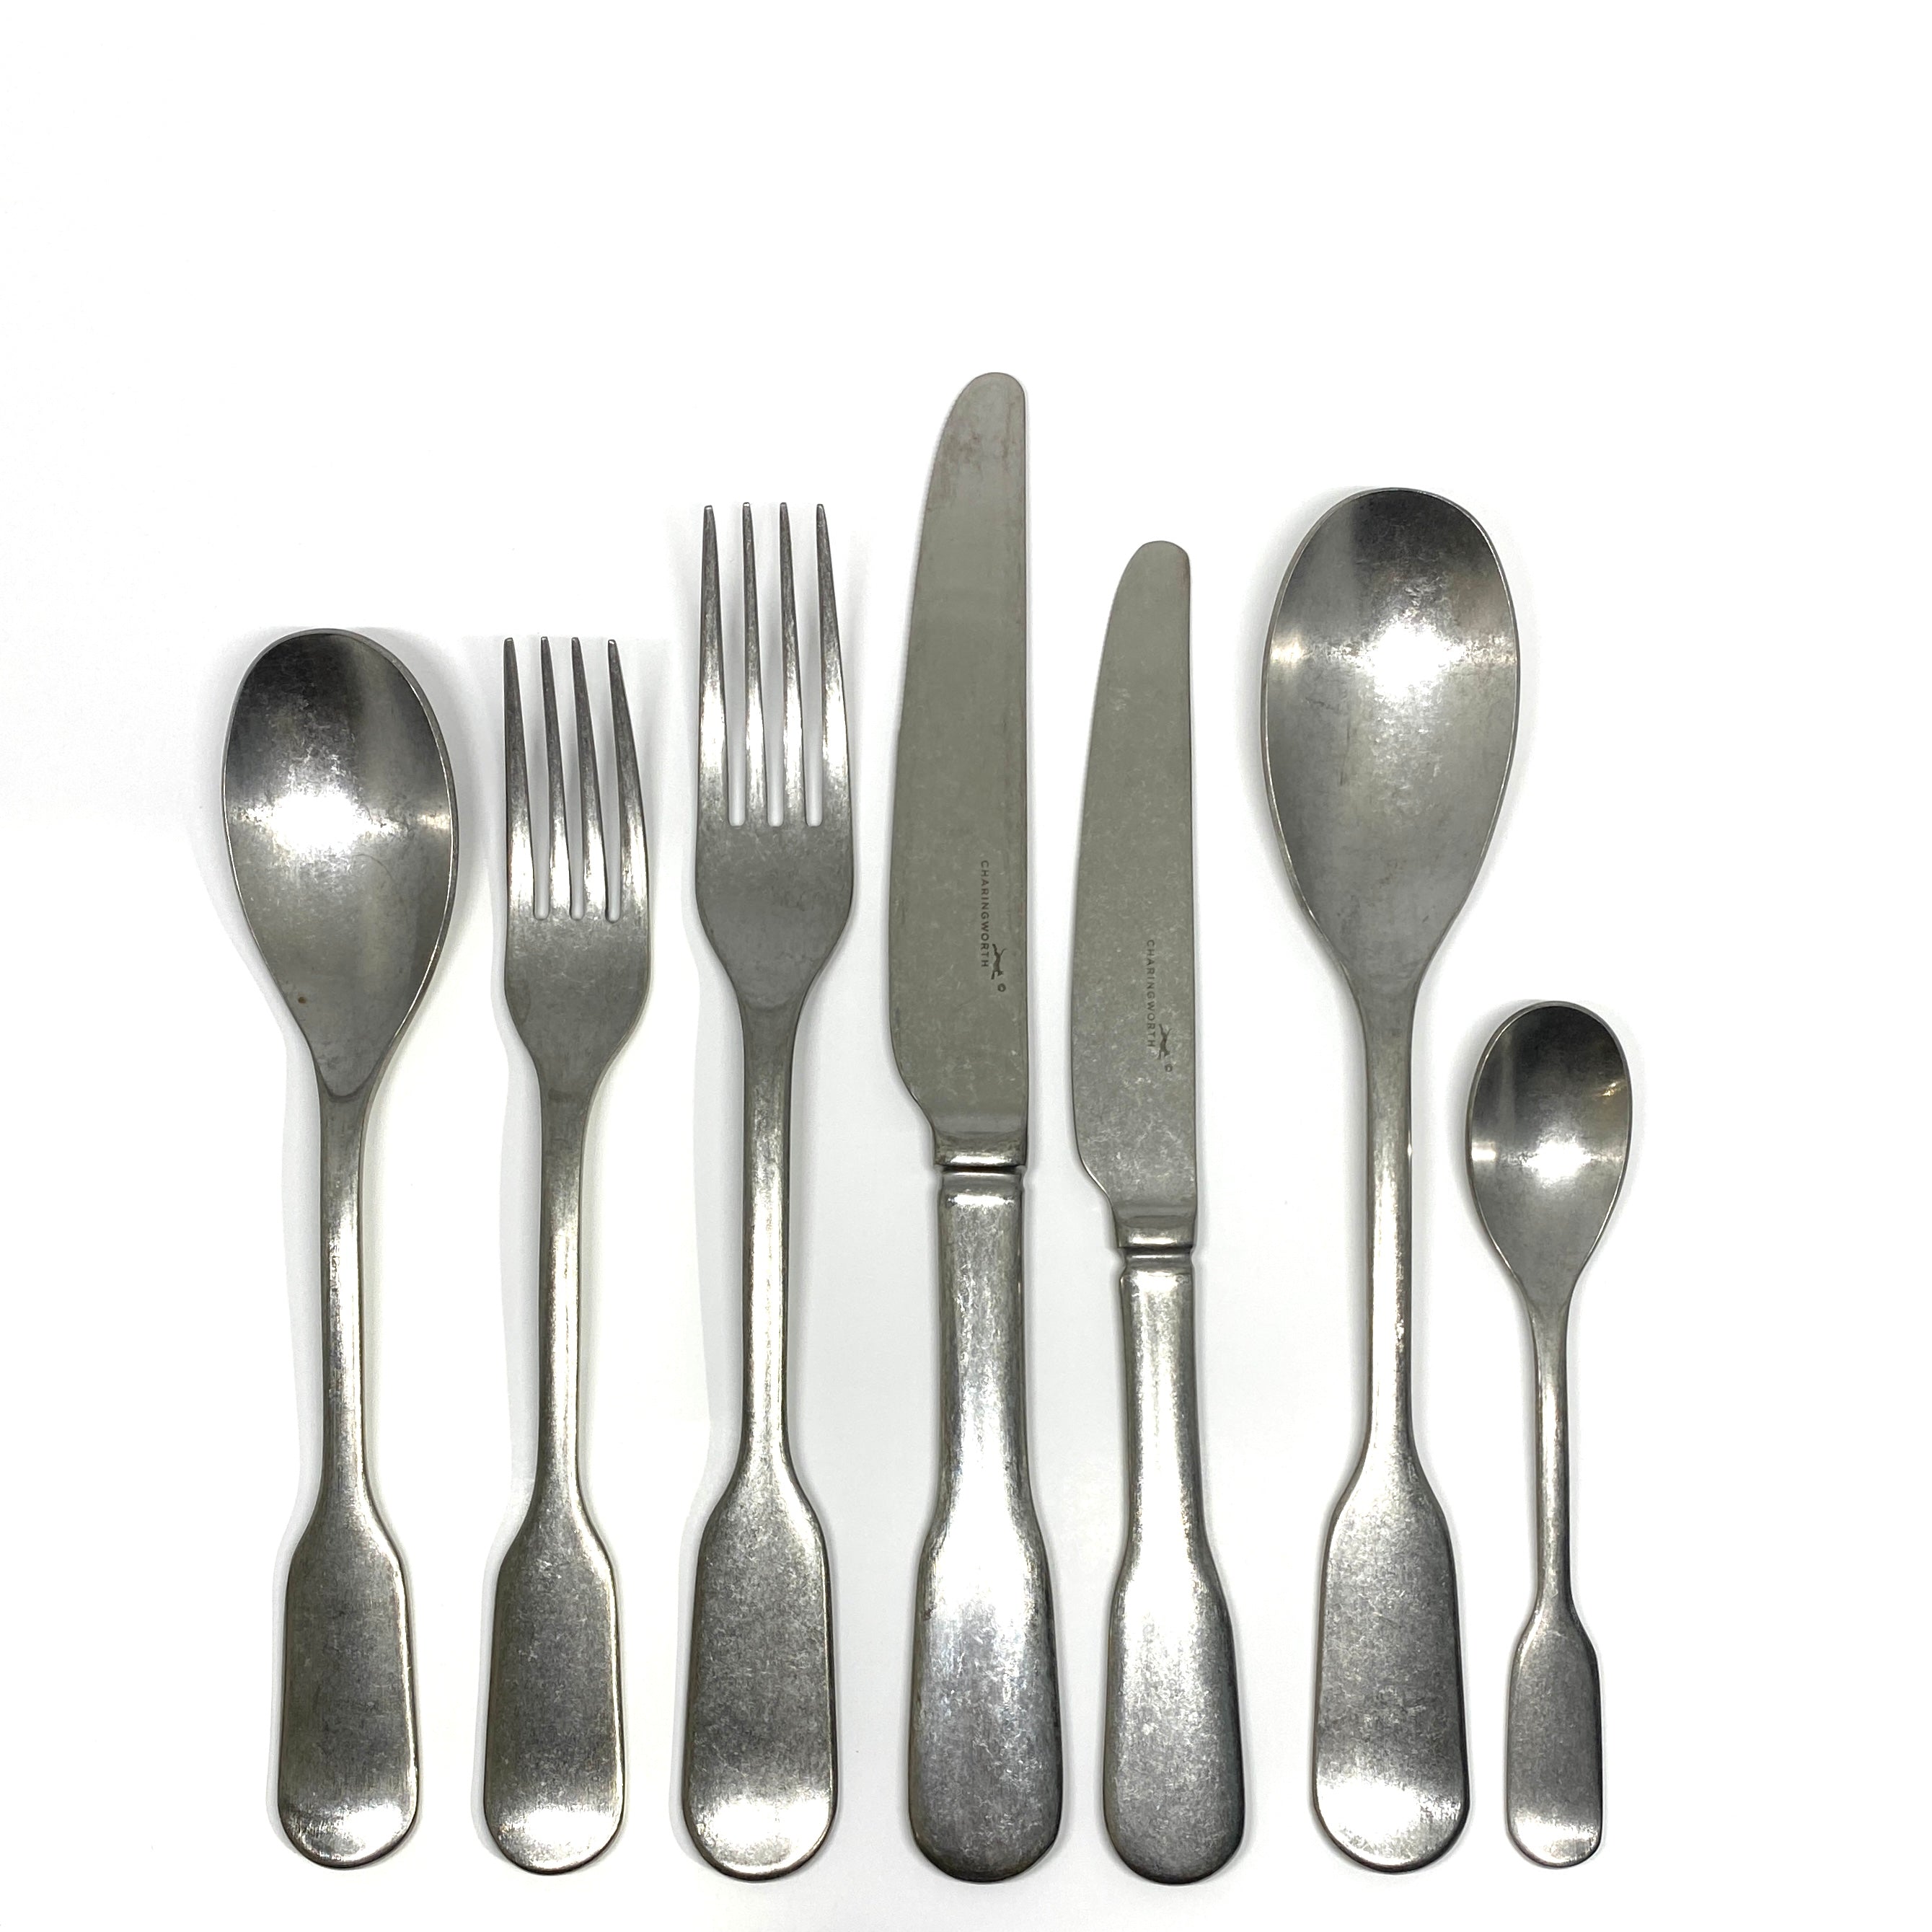 Calais 14 Piece Cutlery Set for two - Vintage Satin Finish - Stainless Steel